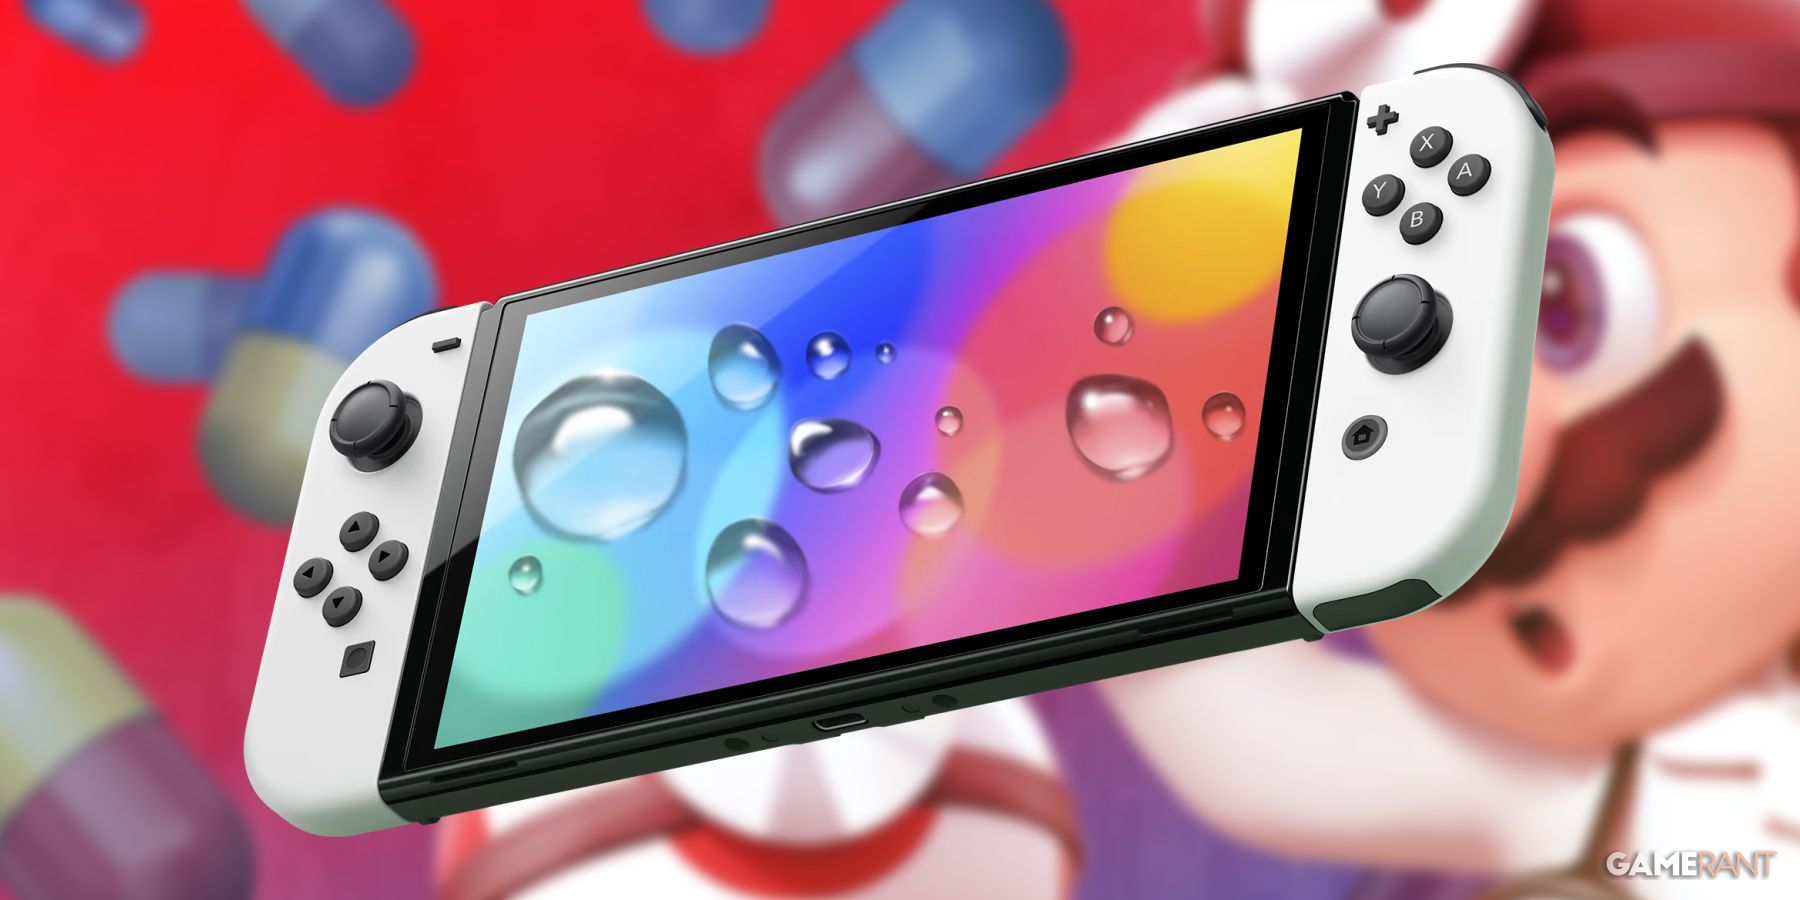 A Nintendo Switch with water droplets edited onto the screen